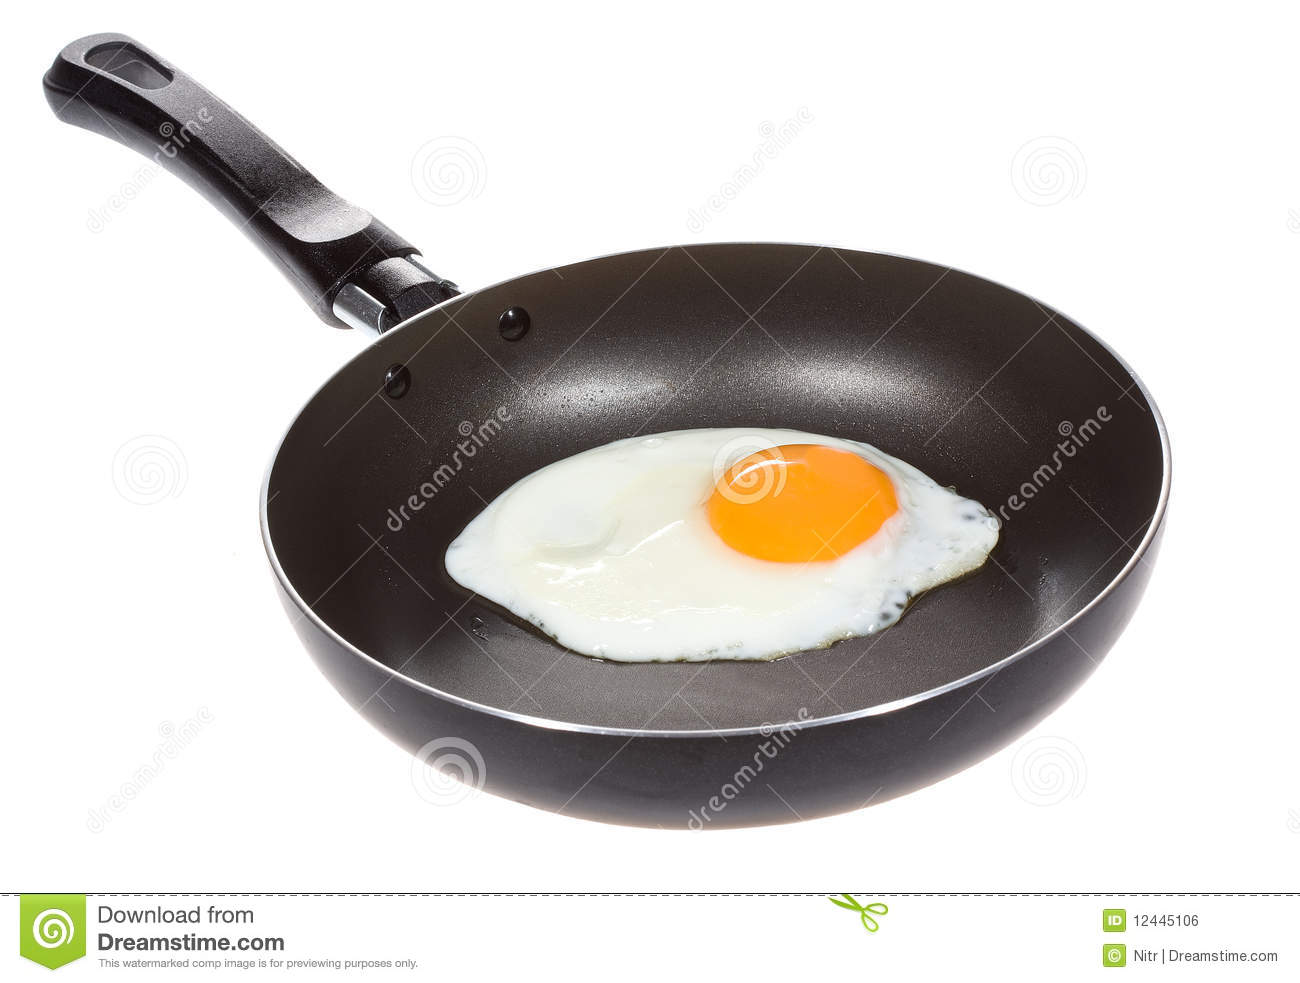 Fried Egg In A Frying Pan Royalty Free Stock Image   Image  12445106